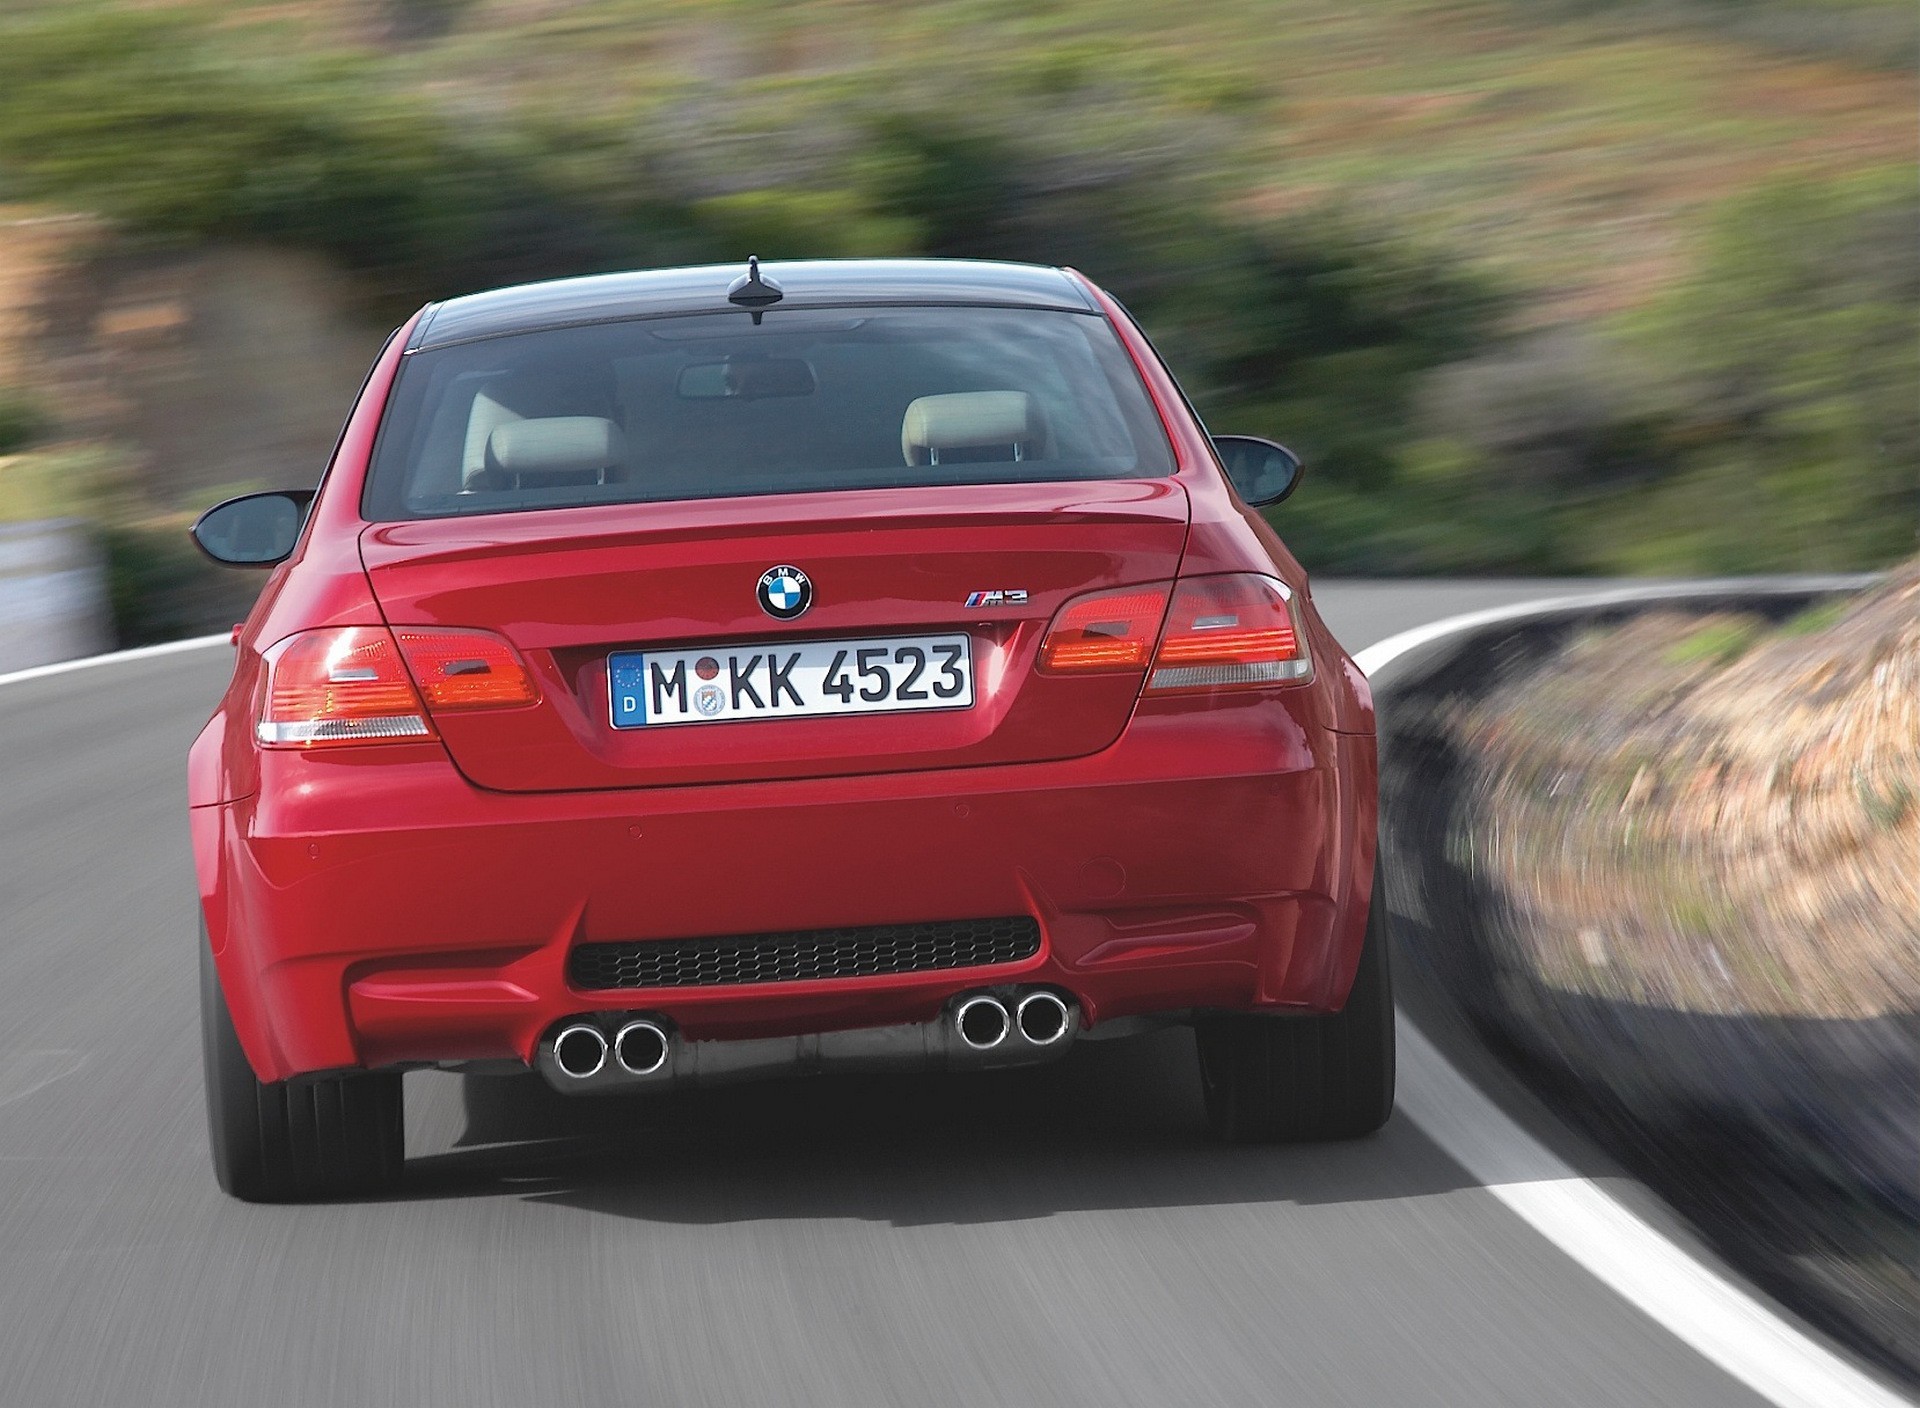 Used car buying guide: BMW M3 (E92)